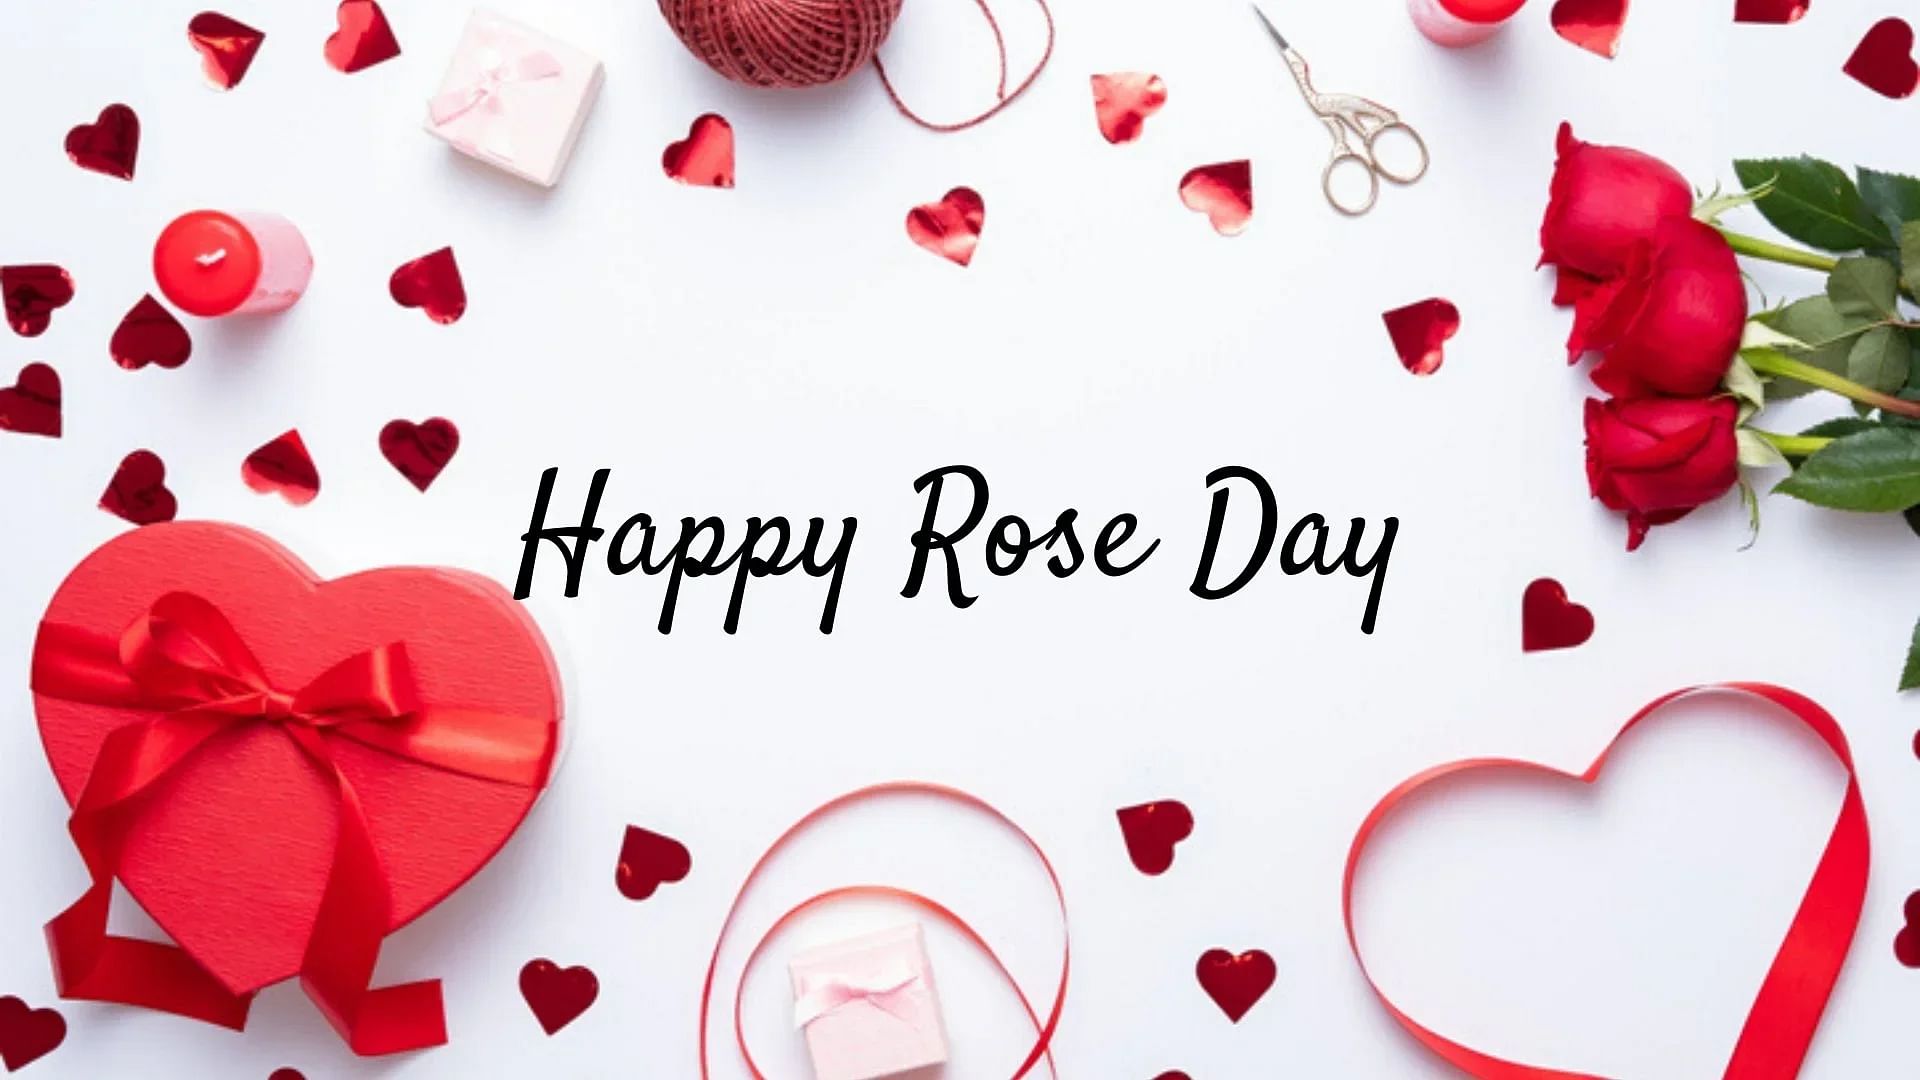 Happy Rose Day 2021 Quotes in English and Hindi. Rose Day Image and Wishes to Send on Facebook, Instagram and WhatsApp